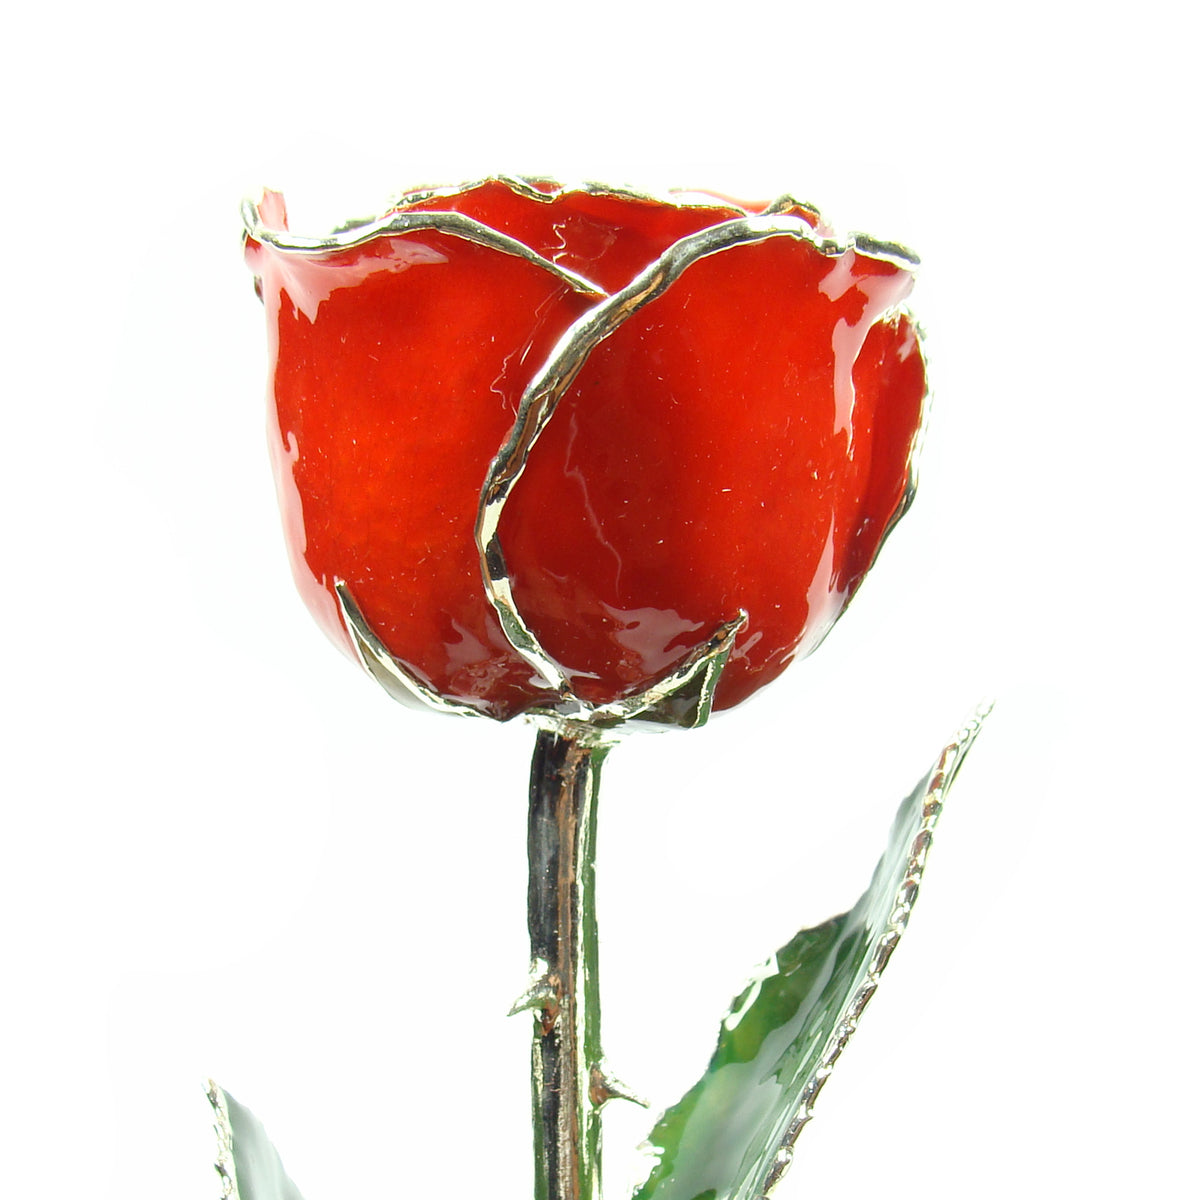 Silver Trimmed Forever Rose with Red Petals. View of Stem, Leaves, and Rose Petals and Showing Detail of Silver Trim